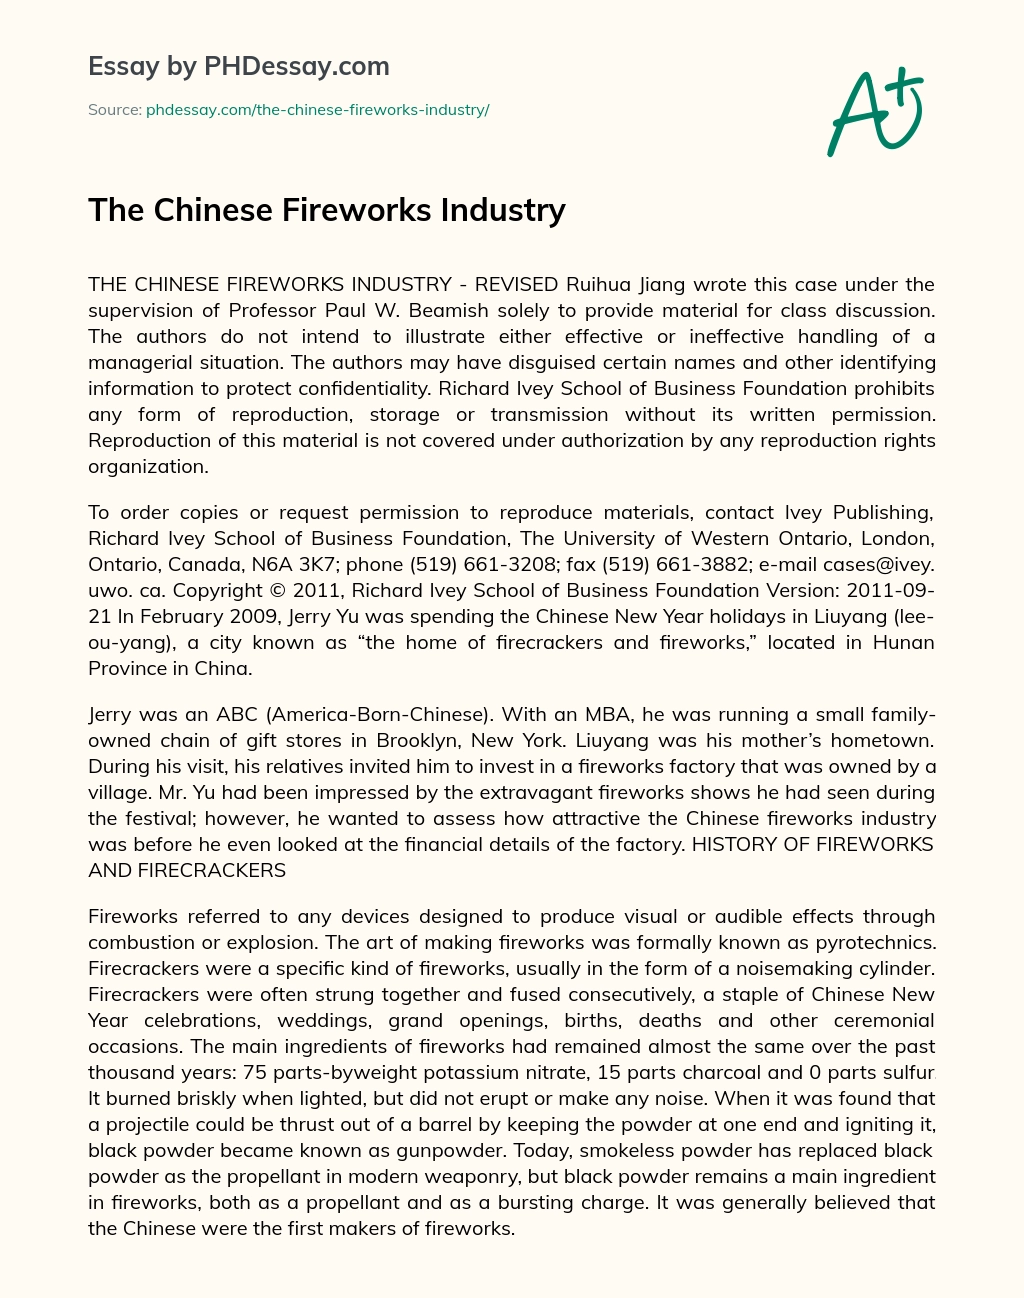 The Chinese Fireworks Industry essay